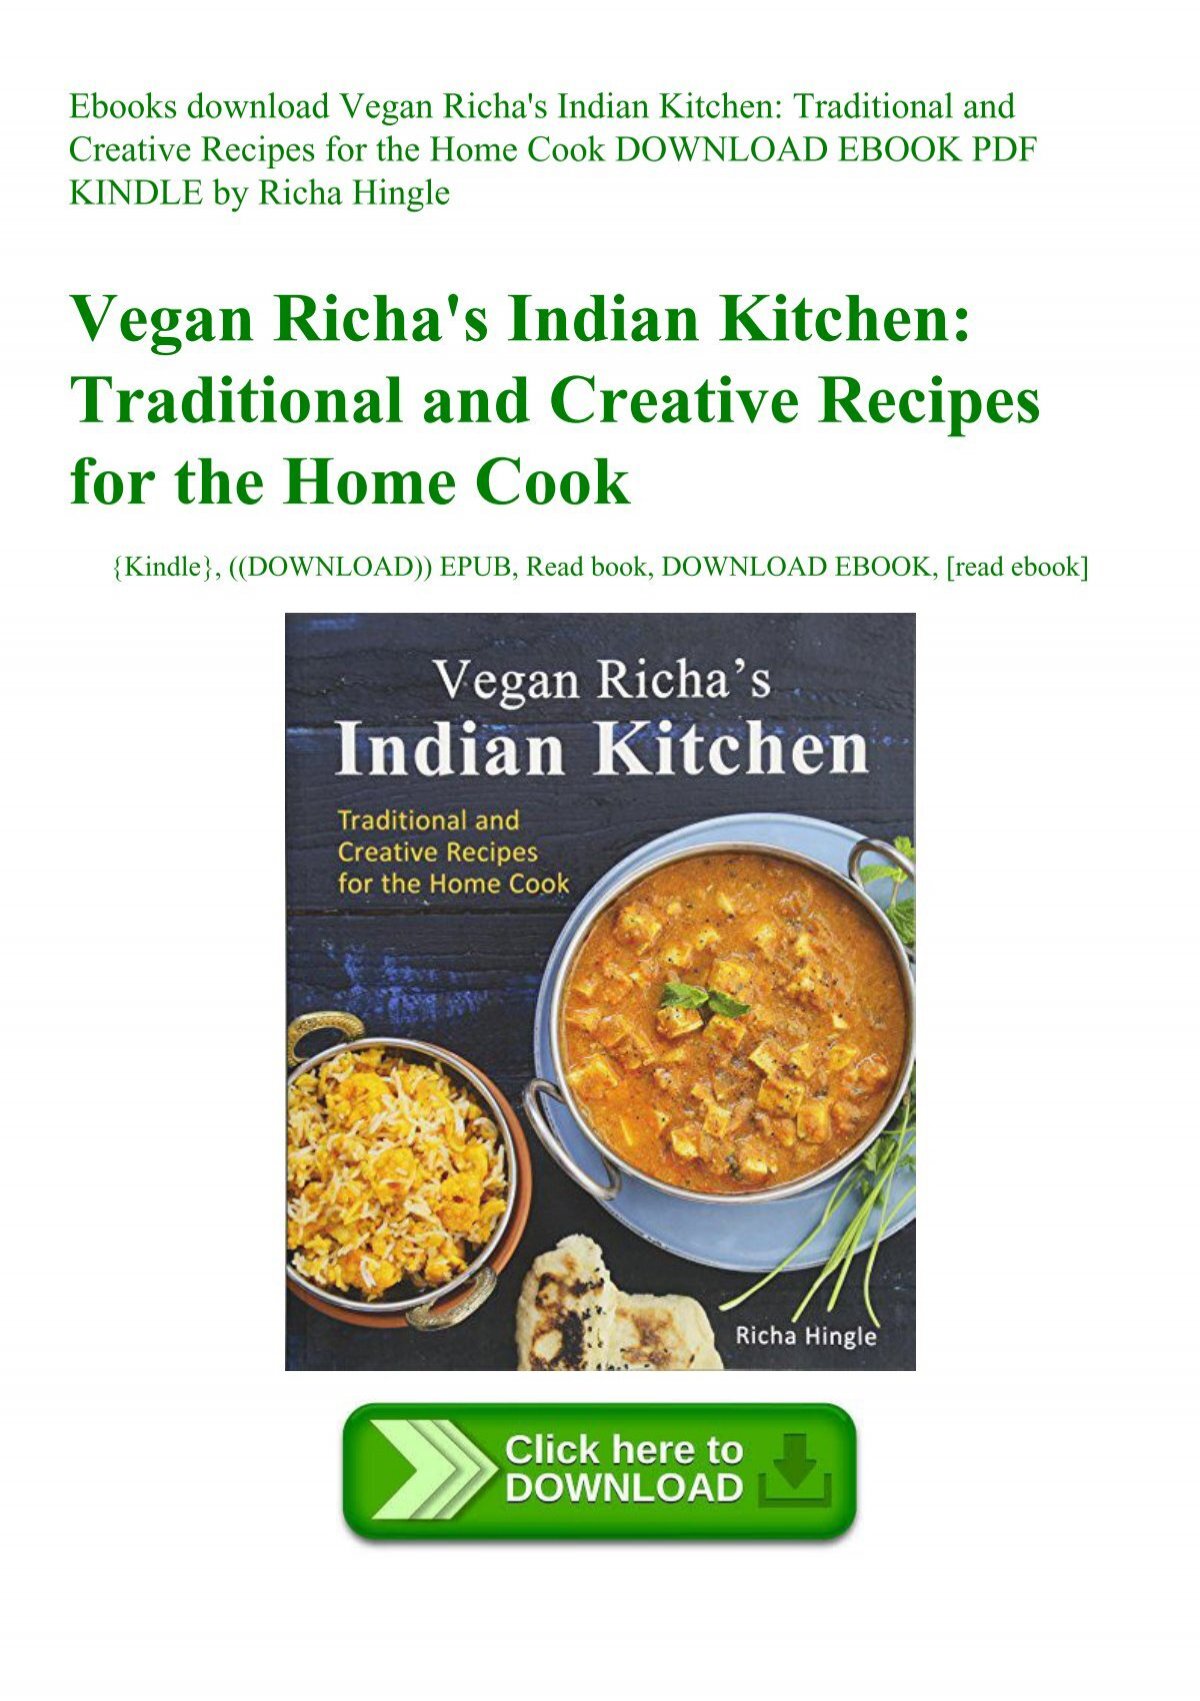 Ebooks Download Vegan Richa 039 S Indian Kitchen Traditional And Creative Recipes For The Home Cook Download Ebook Pdf Kindle By Richa Hingle